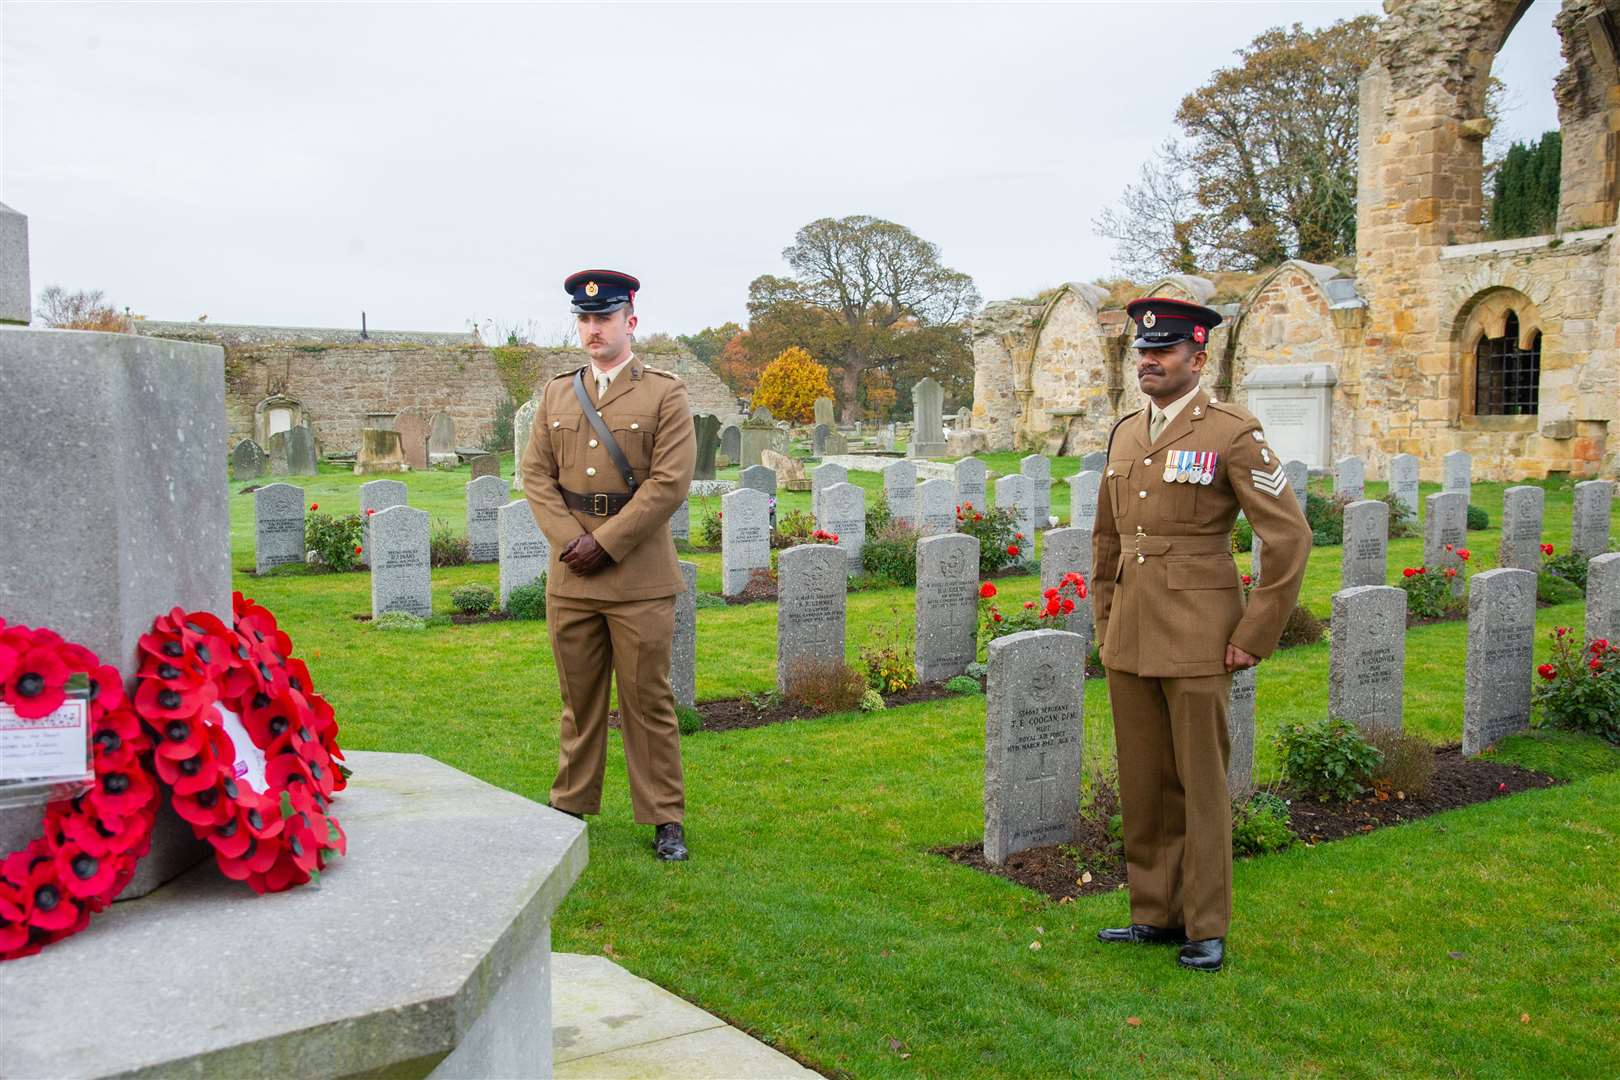 Lt Lalley and Sgt Yaravoli, of the 39 Engineer Regiment, lay a wreath at the Kinloss Memorial, in the grounds of the abbey, on Remembrance Sunday 2020. Picture: Daniel Forsyth.